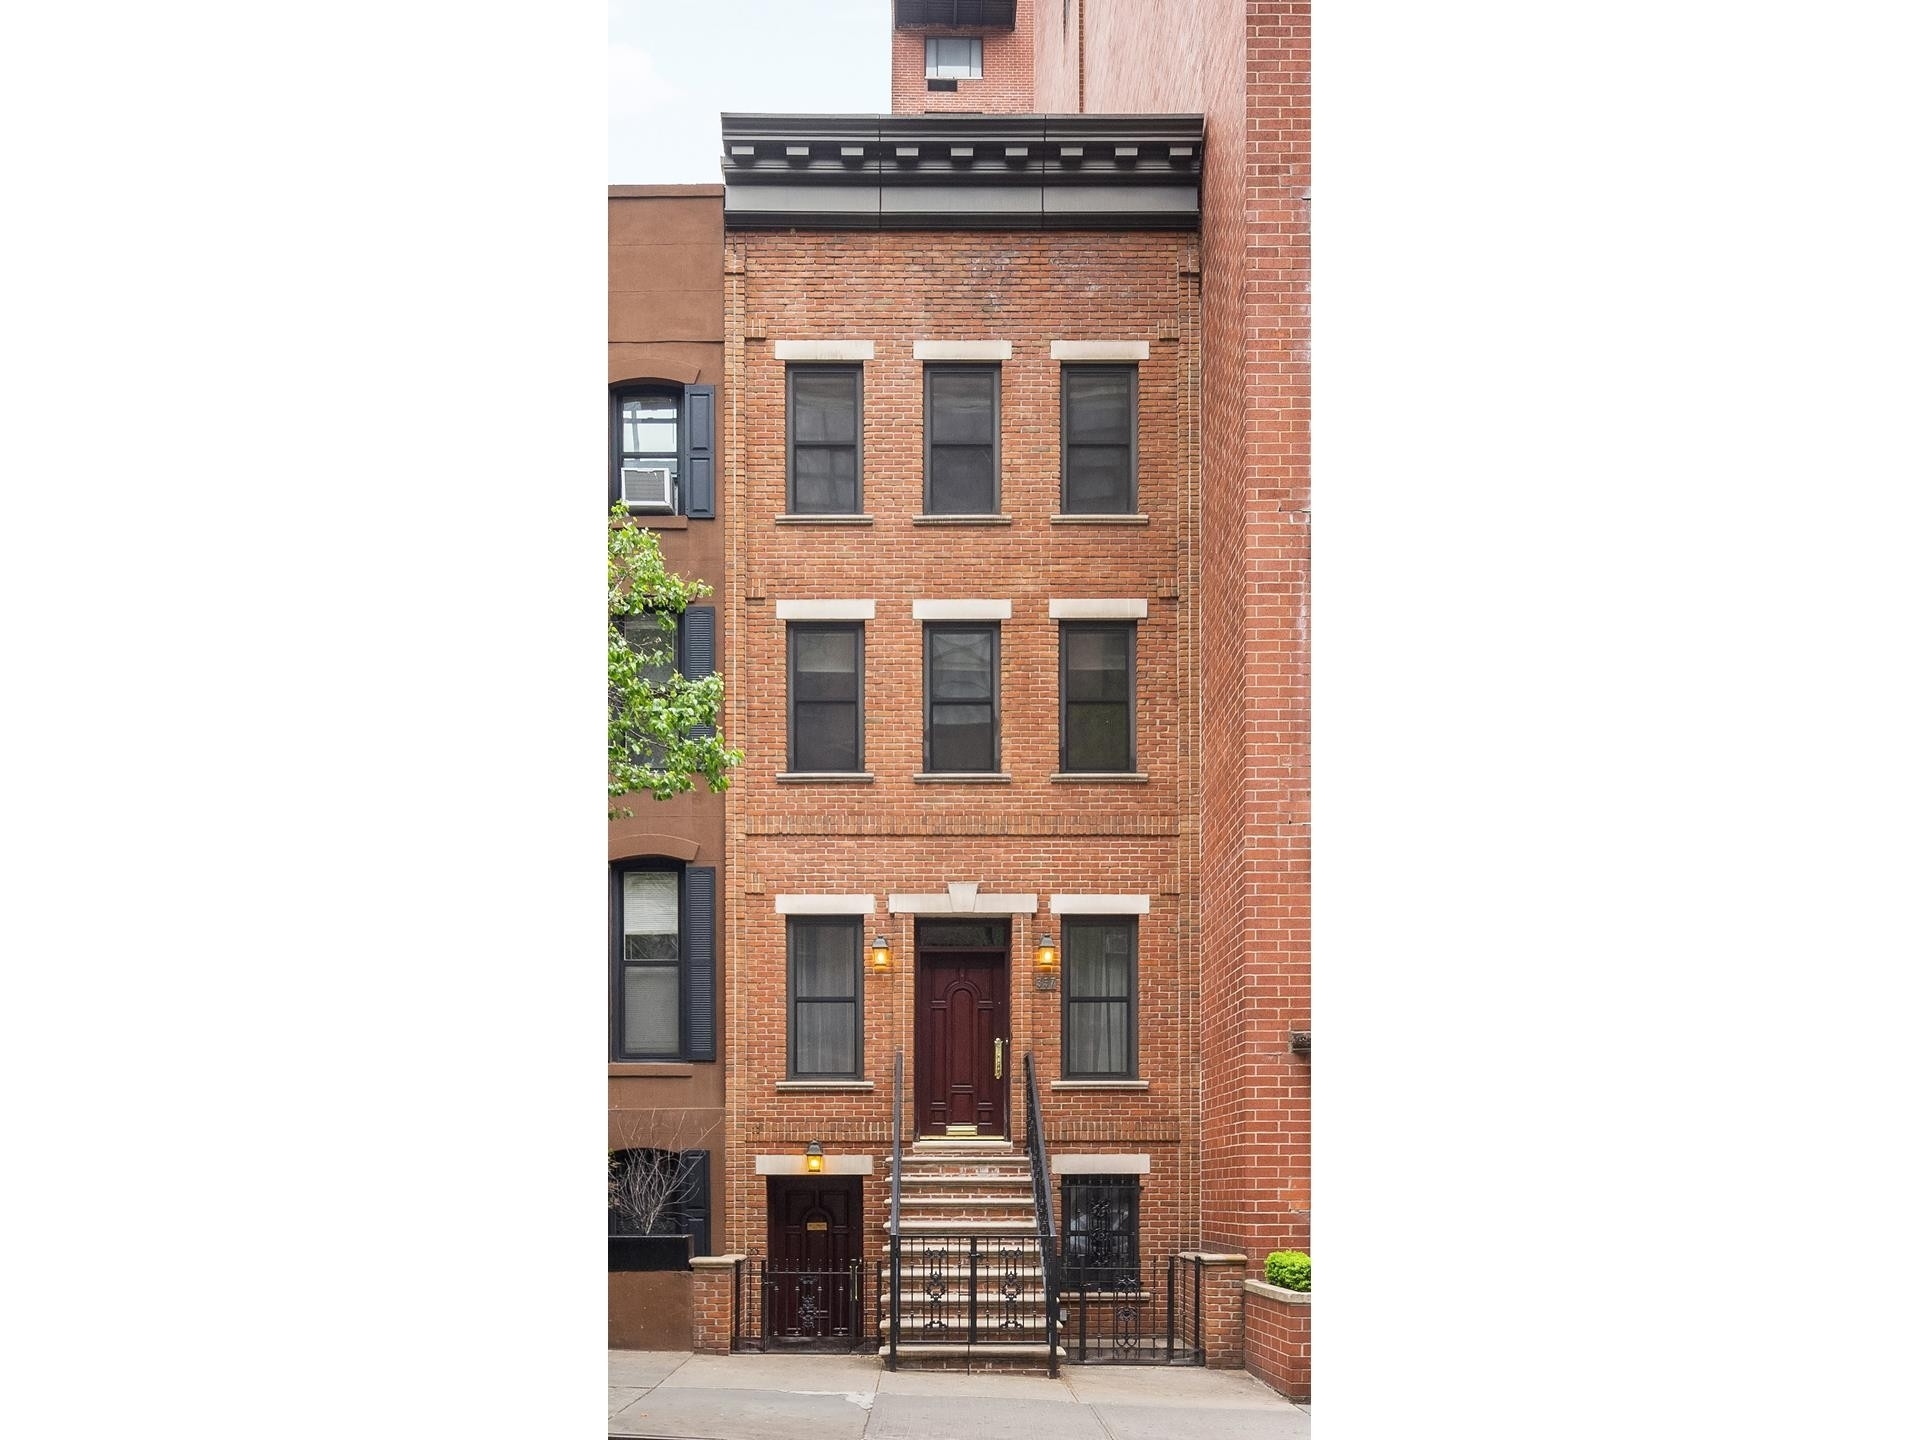 Property at 357 E 62ND ST, TOWNHOUSE Lenox Hill, New York, New York 10065